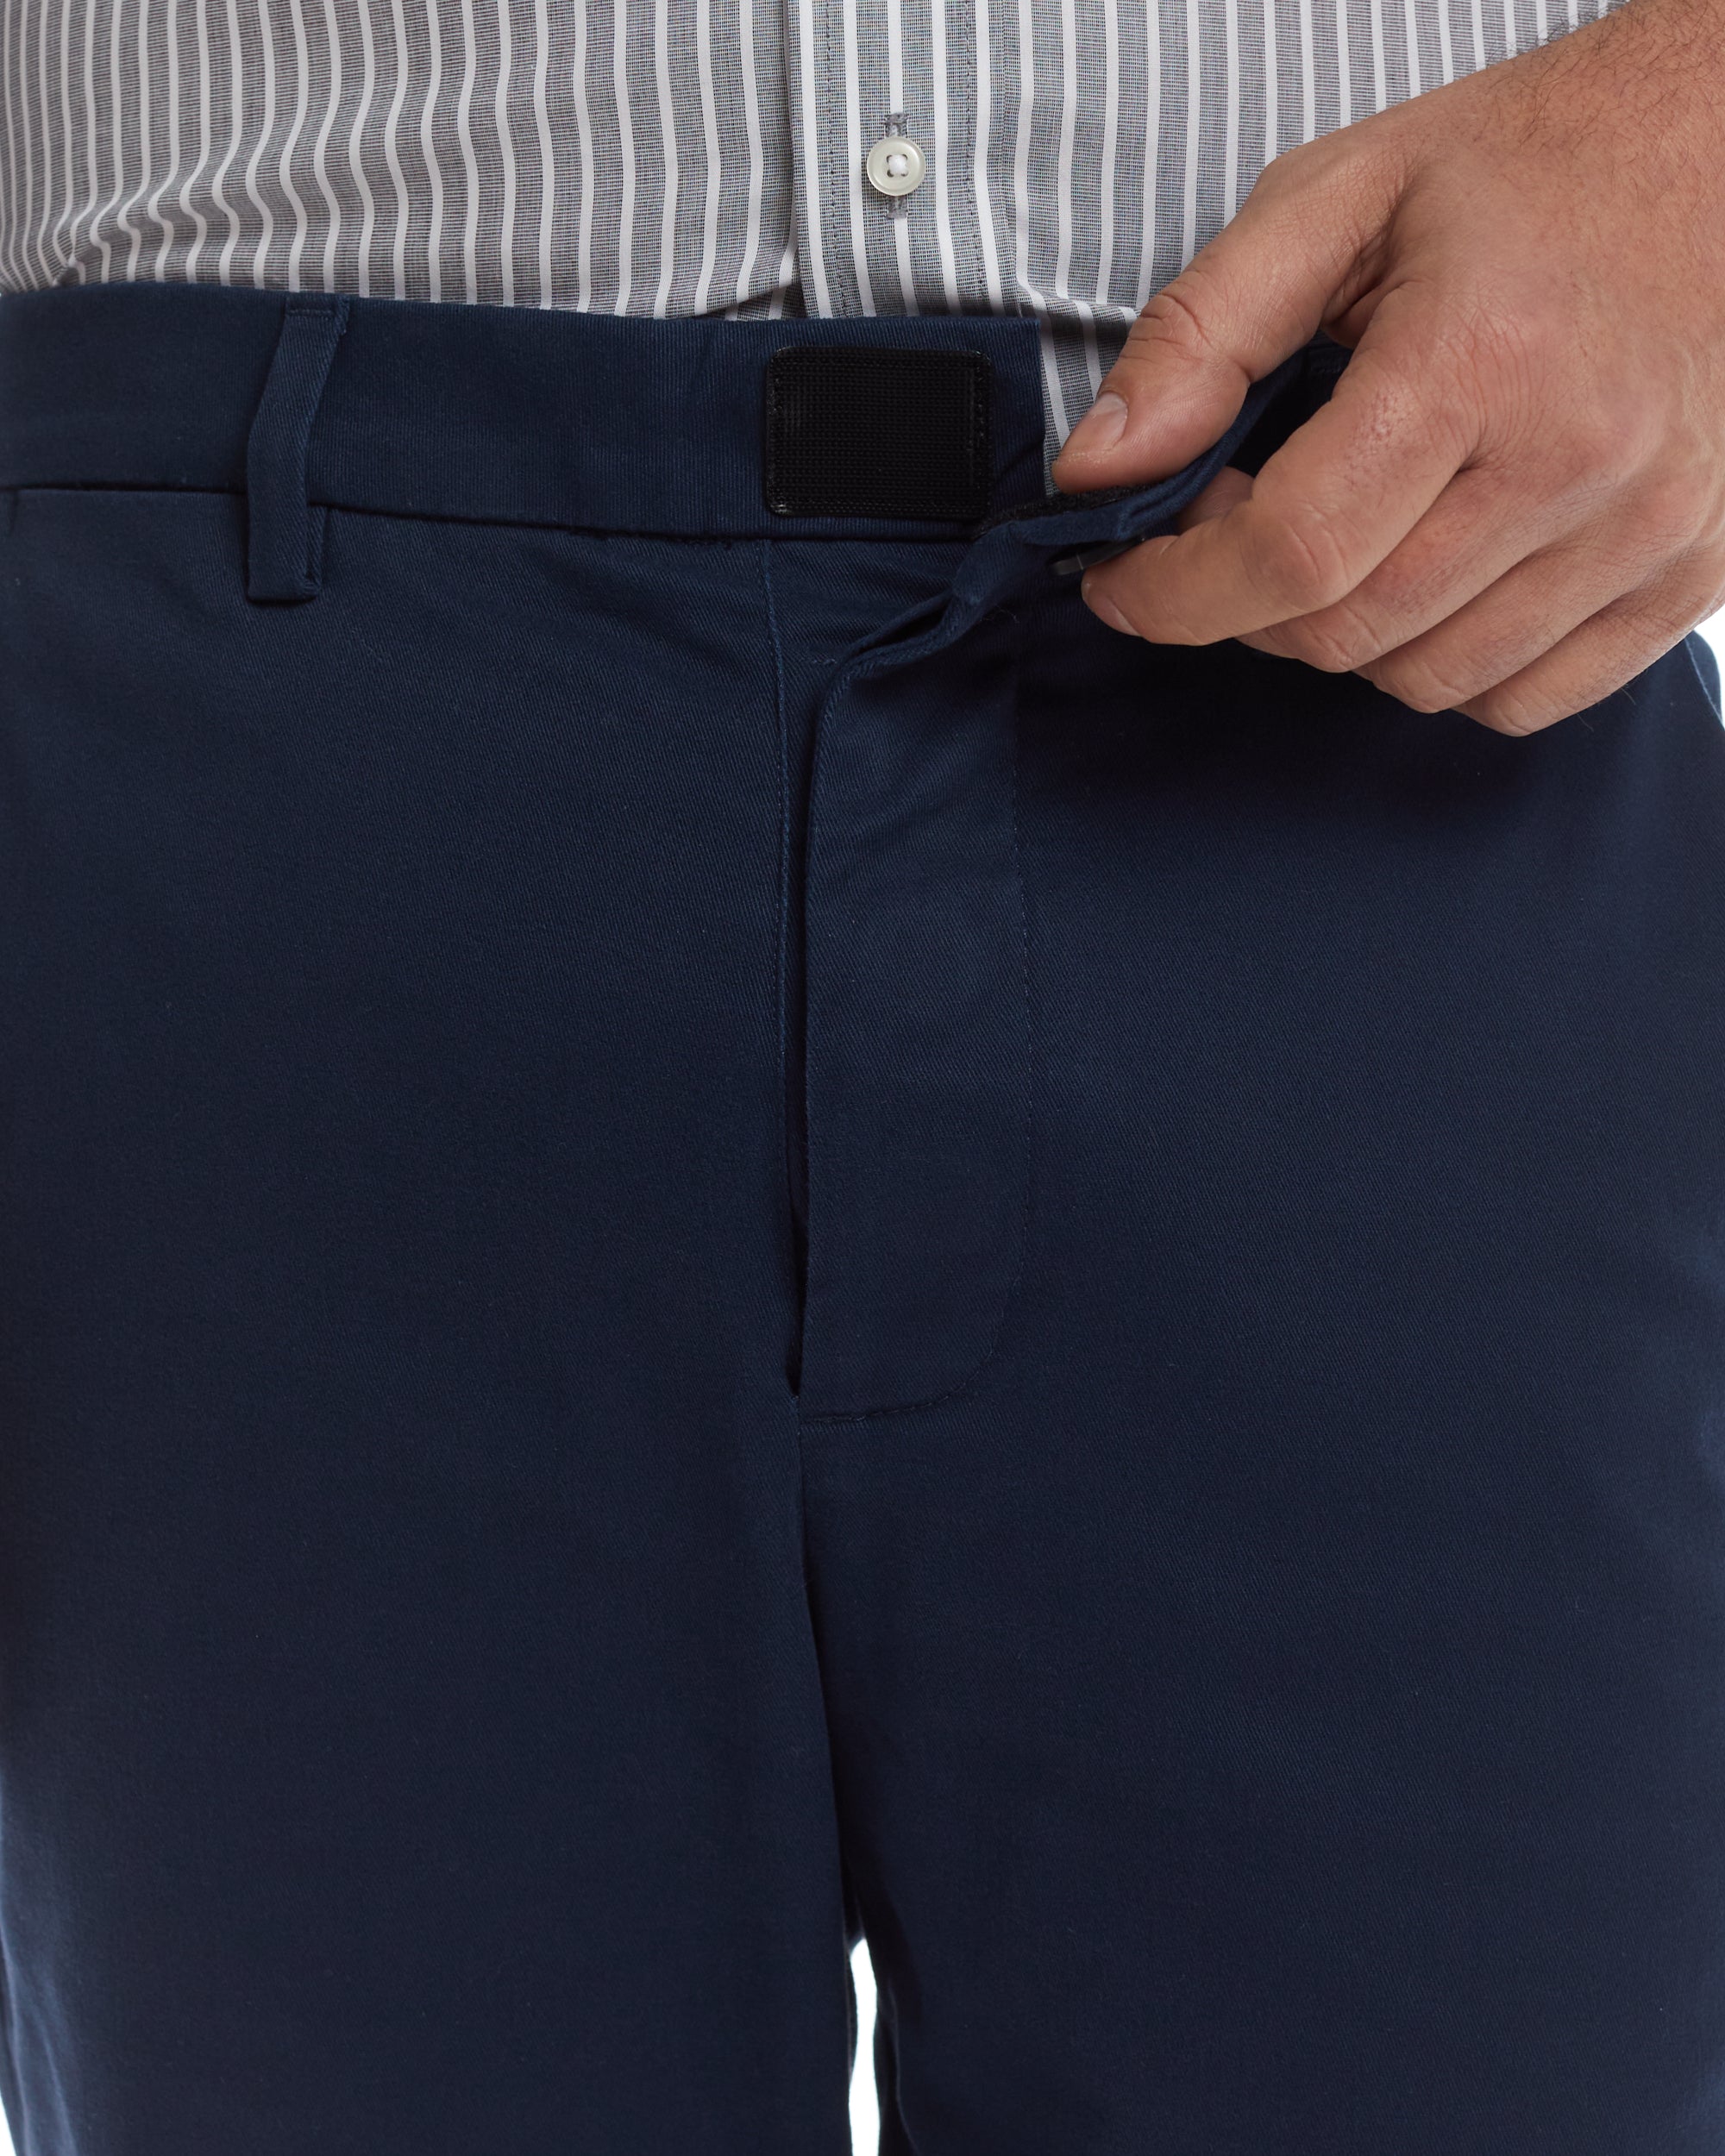 Flat Front 'Fordham' Easy-Cary Chino Twill Pant with Magnetic Closures - Navy